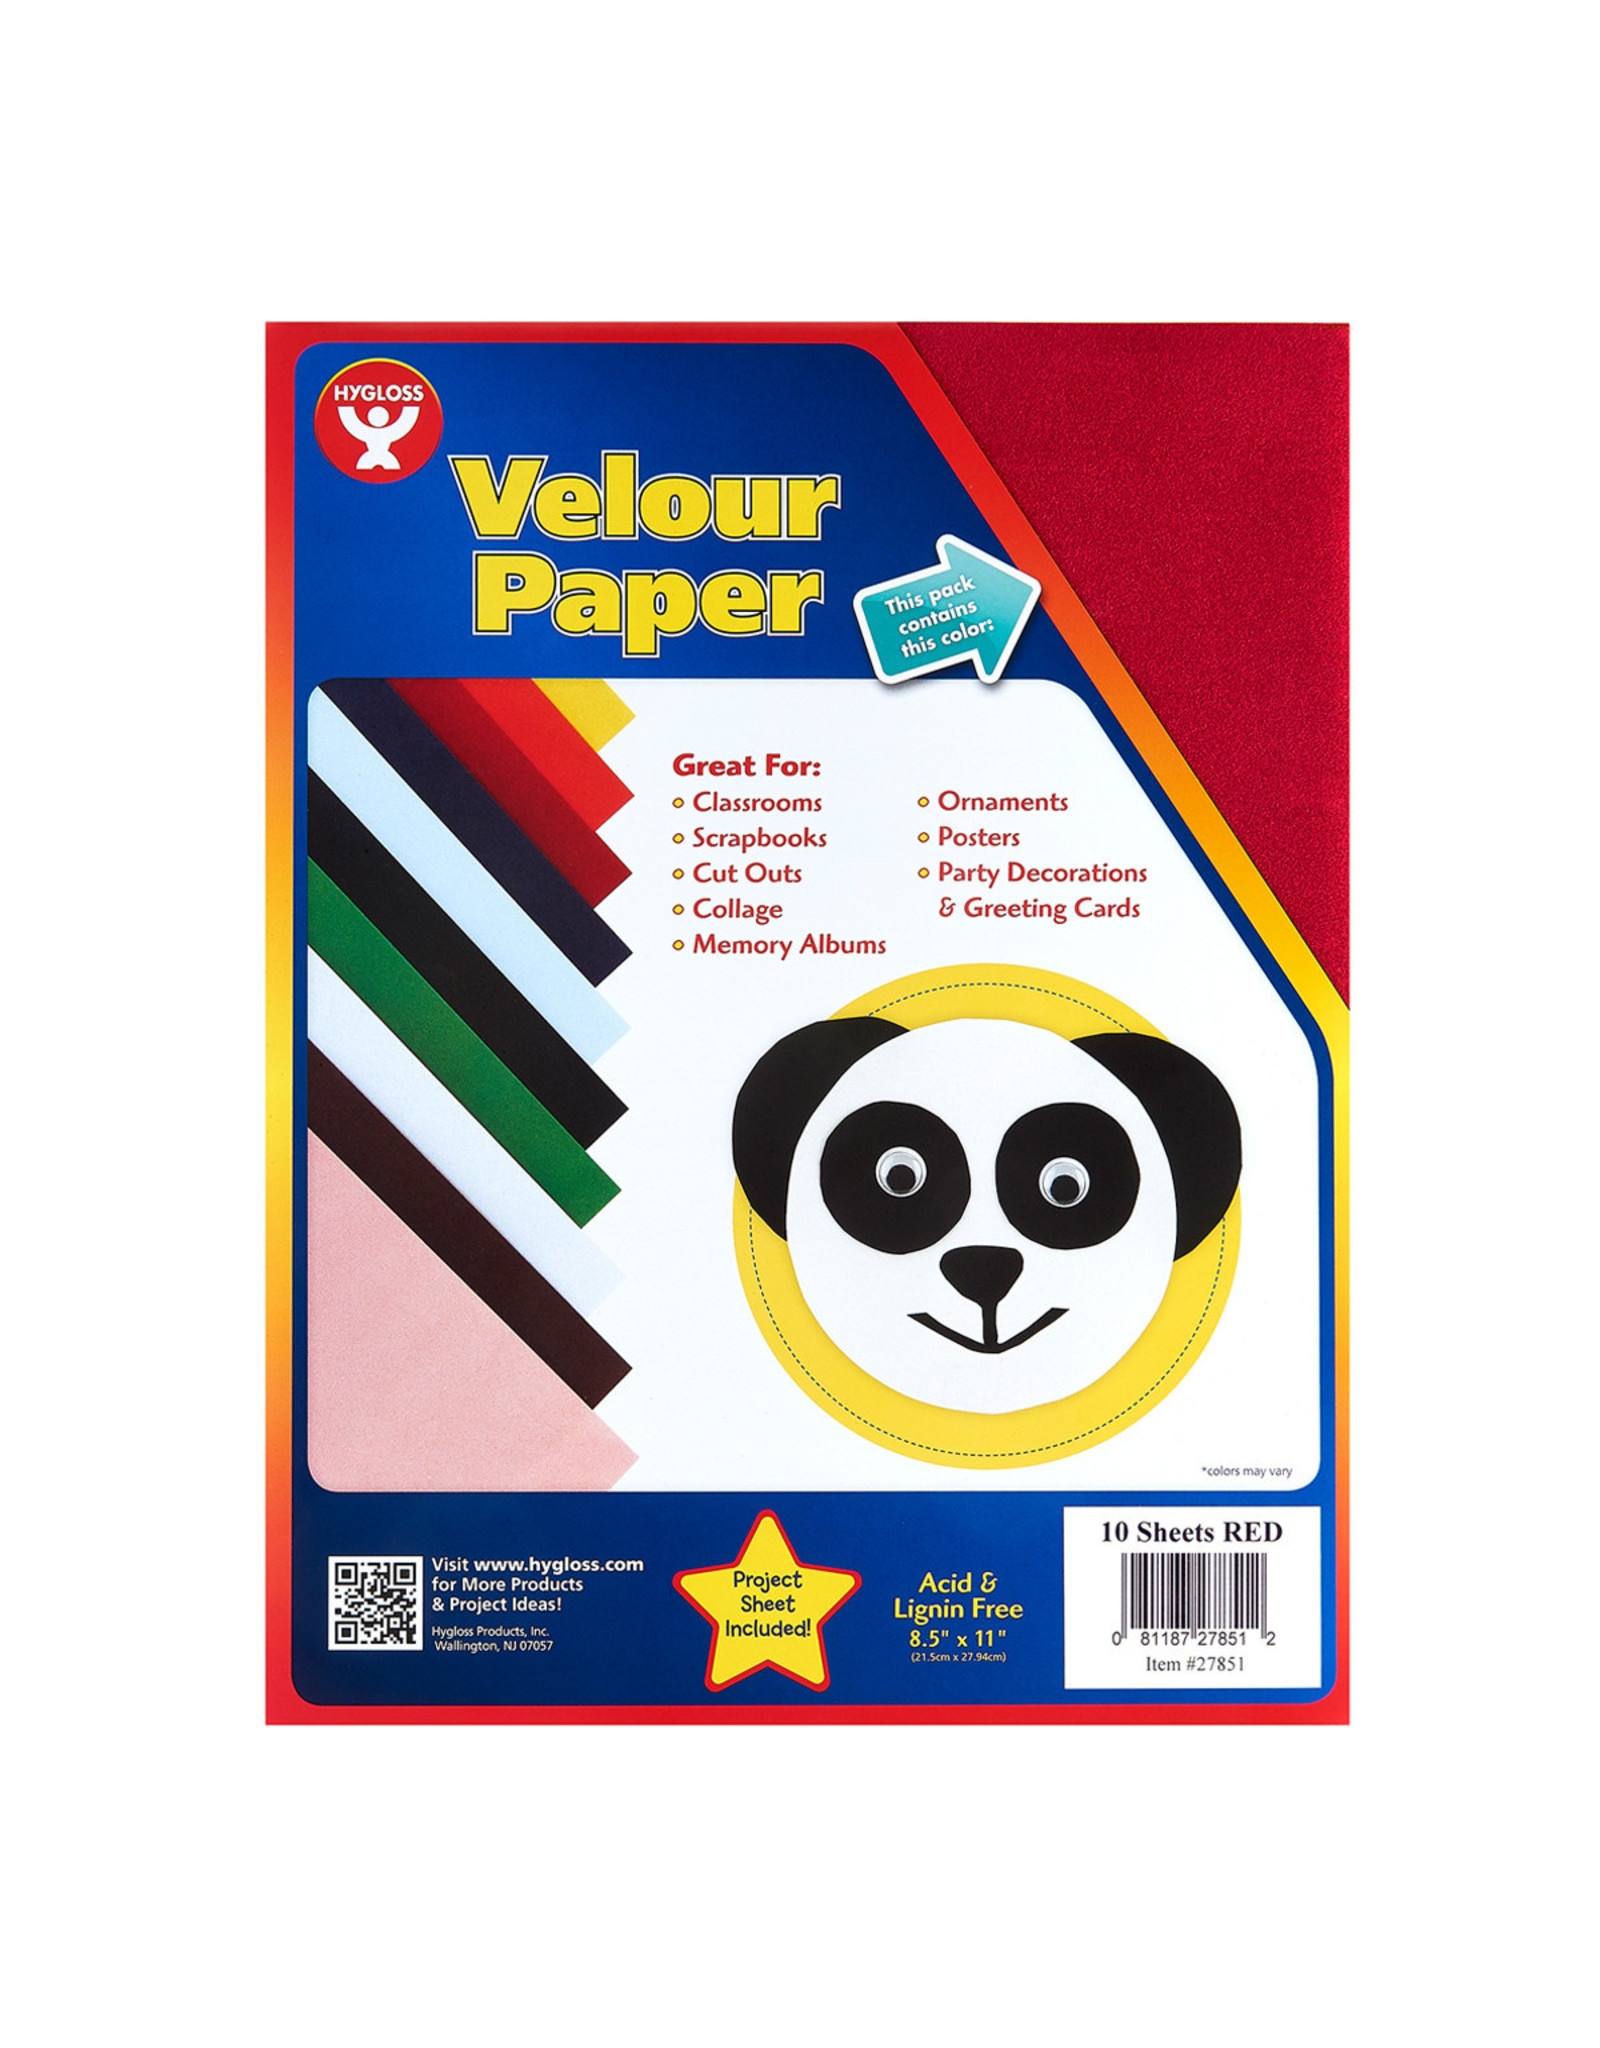 HYGLOSS VELOUR PAPER - 8.5x11 - RED 10 PACK